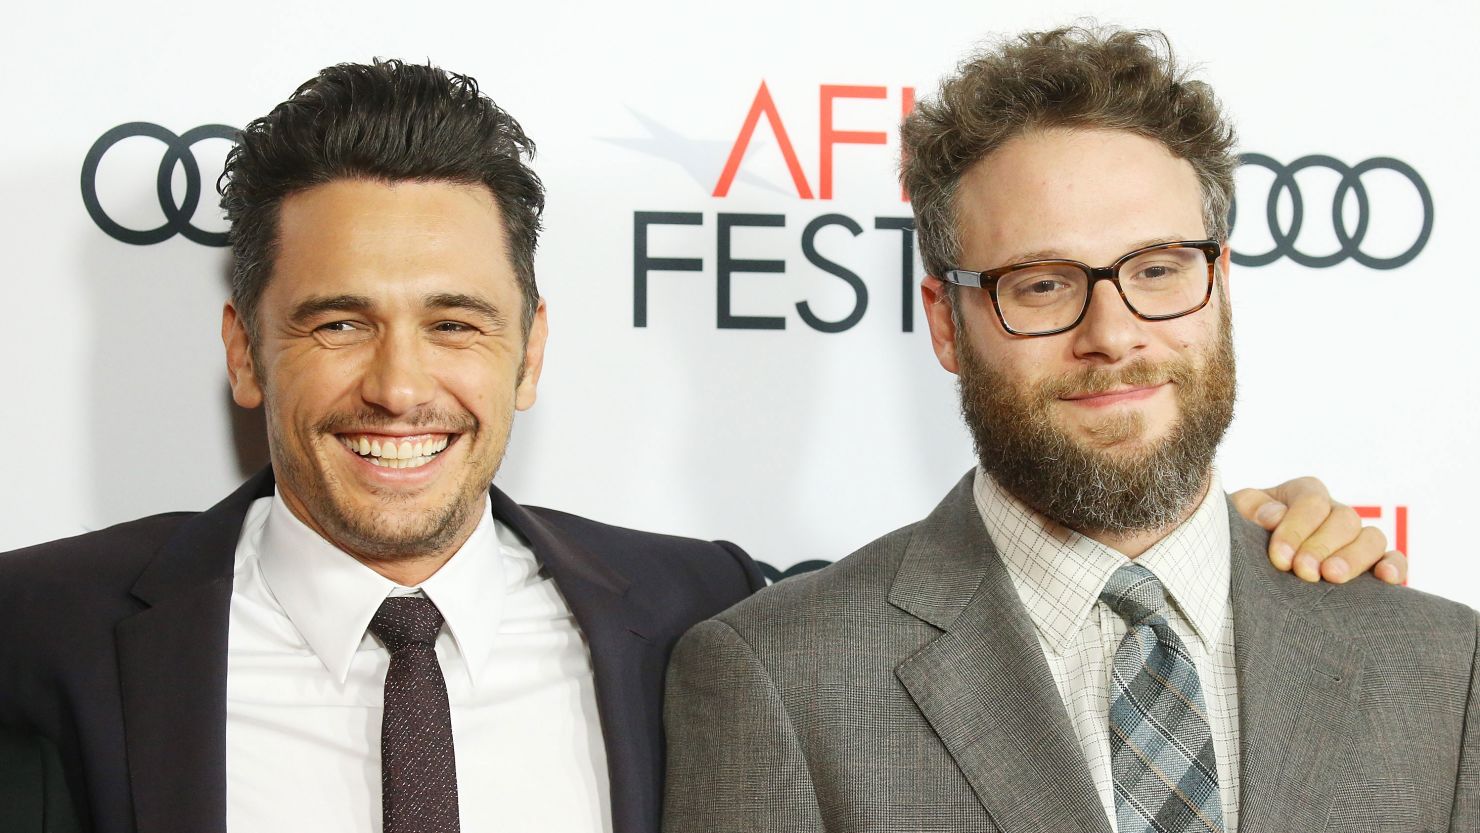 Seth Rogen and James Franco appeared together in numerous movies including "The Interview," "Sausage Party," "The Disaster Artist," and "Pineapple Express." 